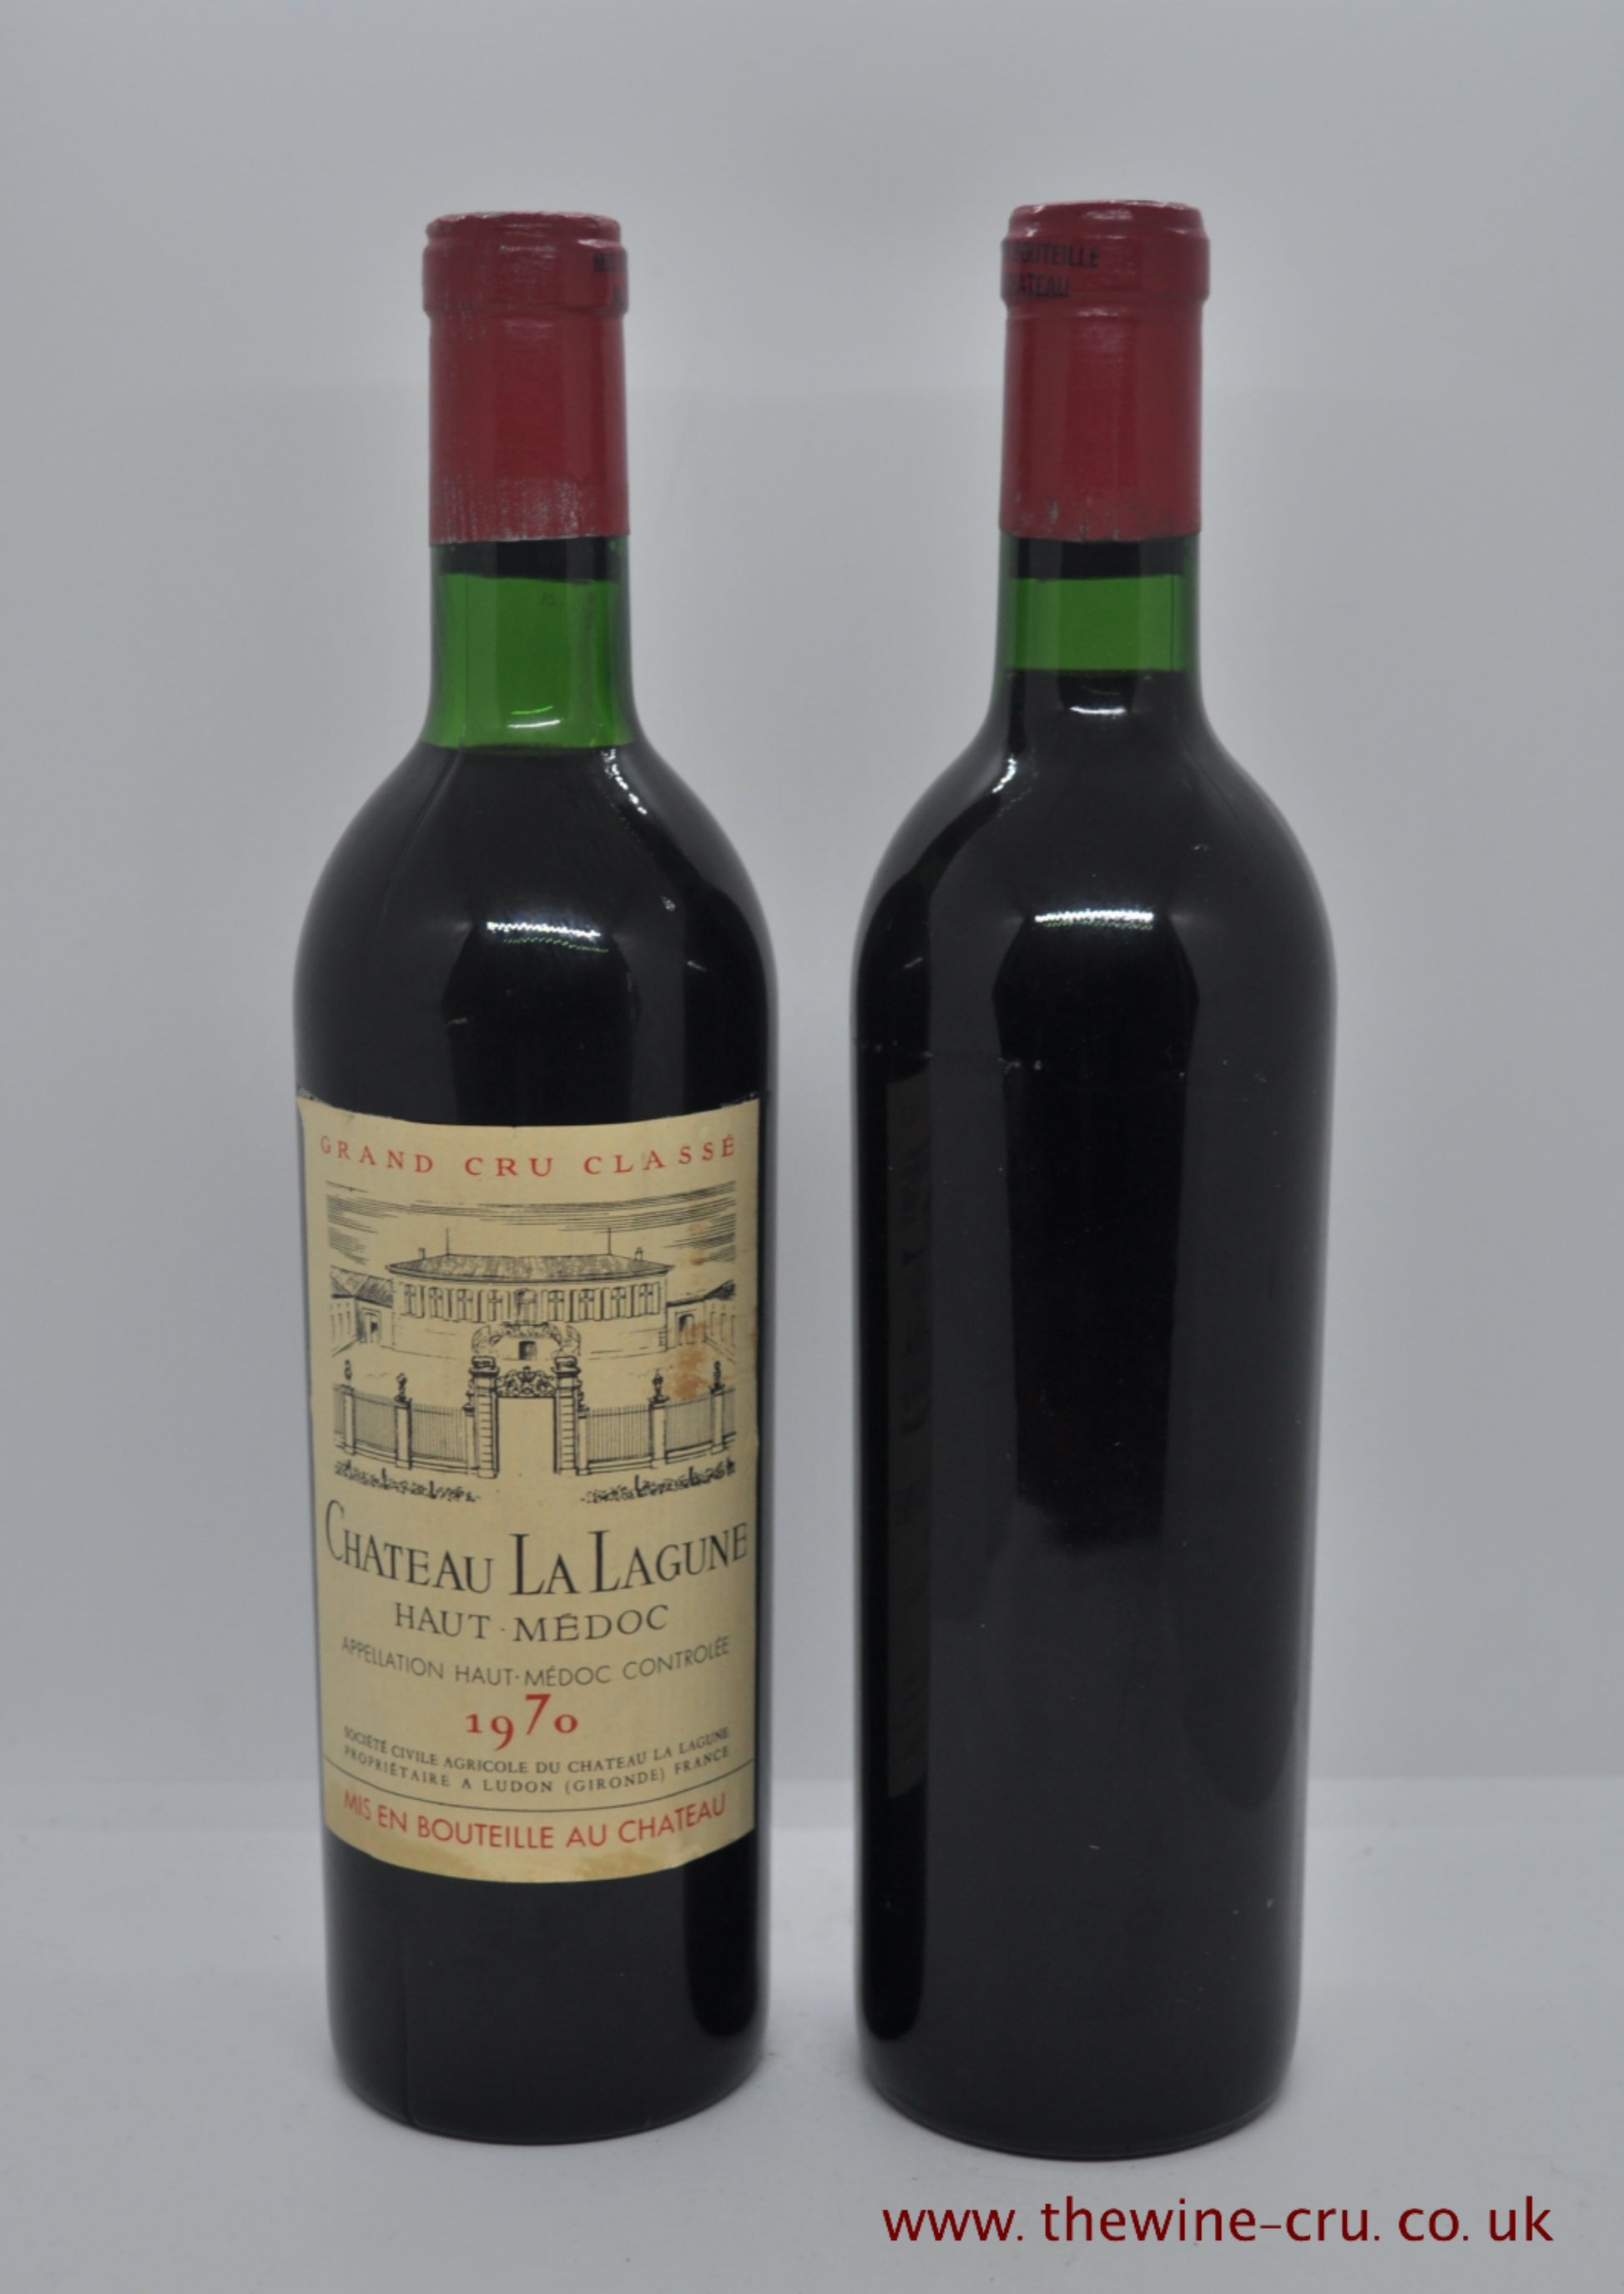 1970 vintage red wine. A pair of Chateau La Lagune 1970. One with no label. France Bordeaux. Immediate delivery. Free delivery UK